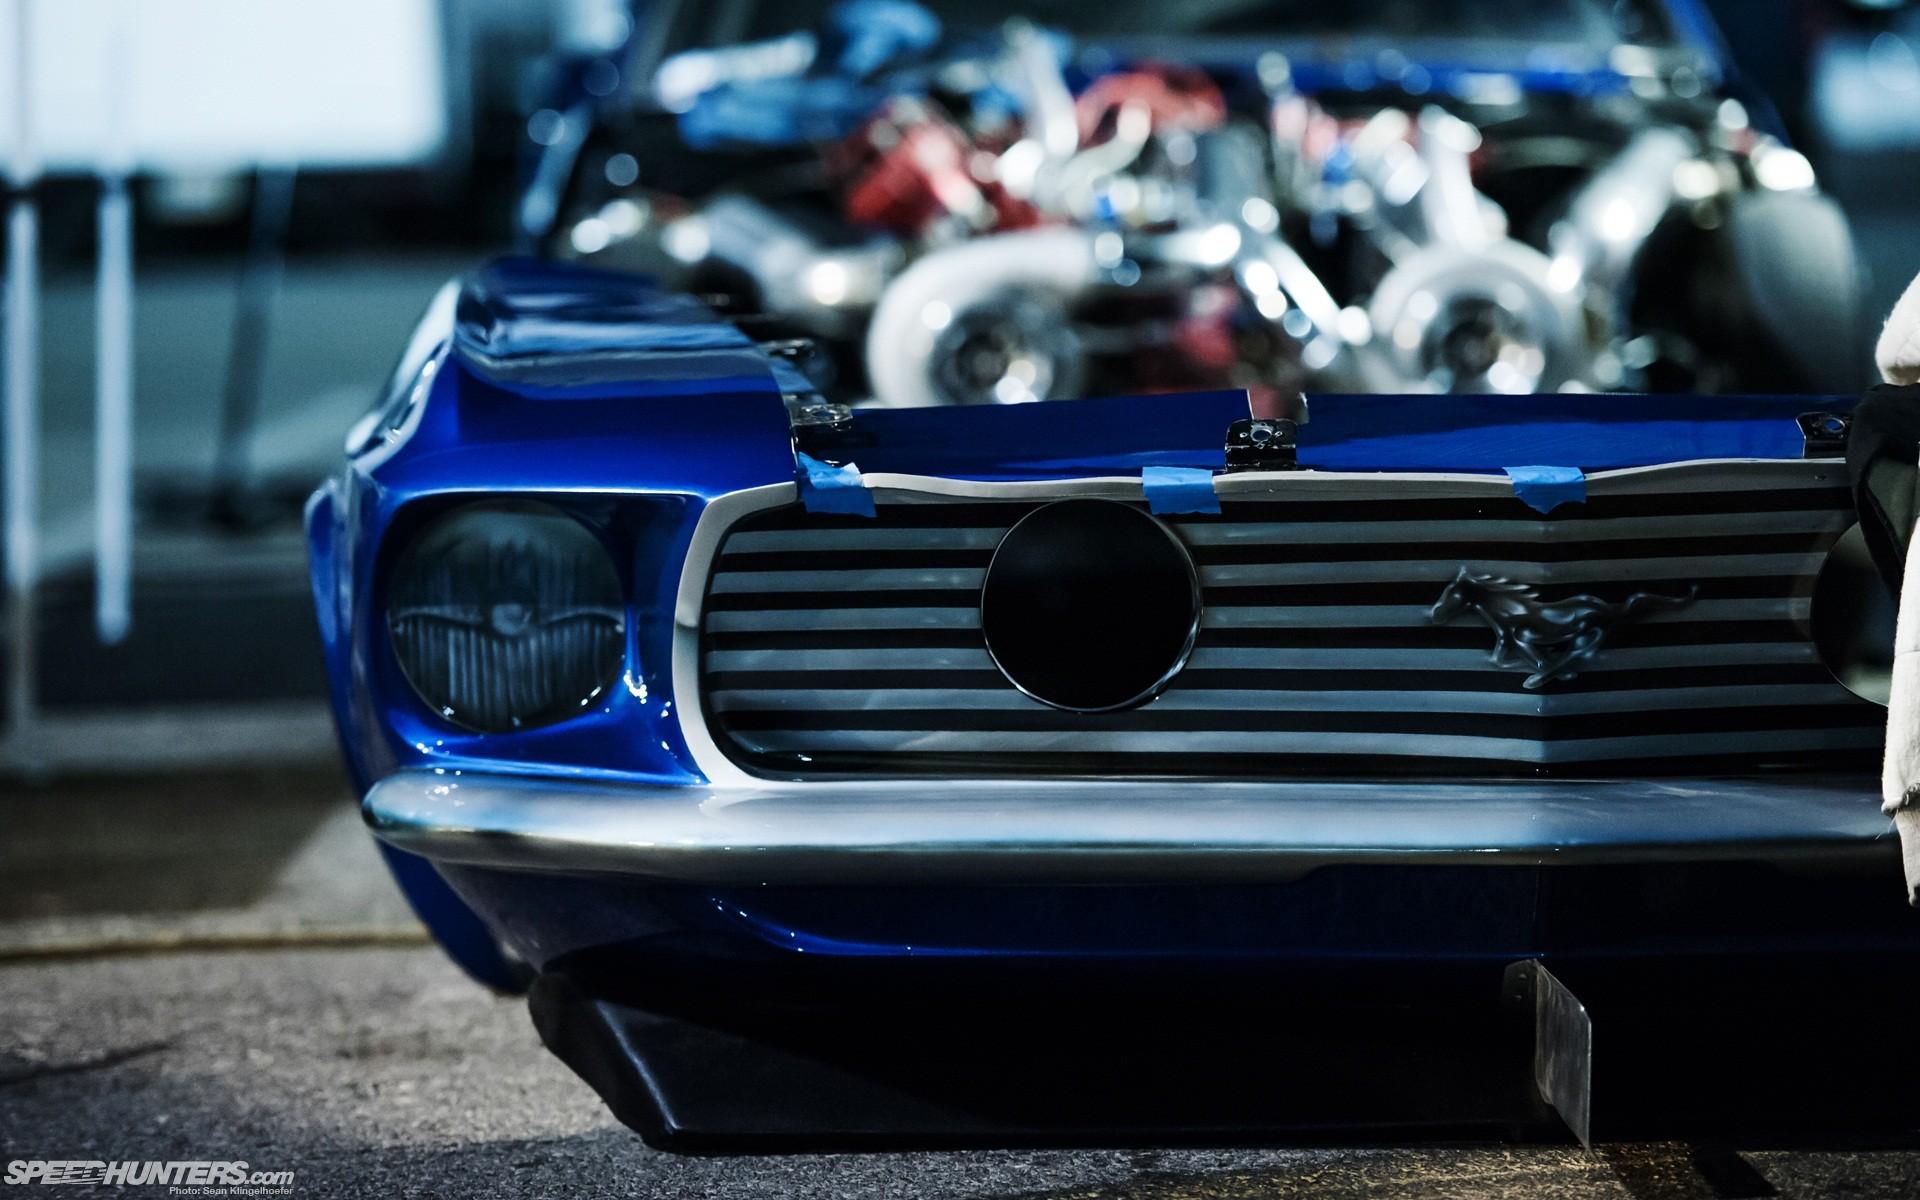 speddhunters, Ford, Mustang, Shelby, Vehicle, Cars, Hot, Rod, Muscle, Engine, Nitro, Turbo, Front, Blue, Chrome, Drag, Racing, Race Wallpaper HD / Desktop and Mobile Background